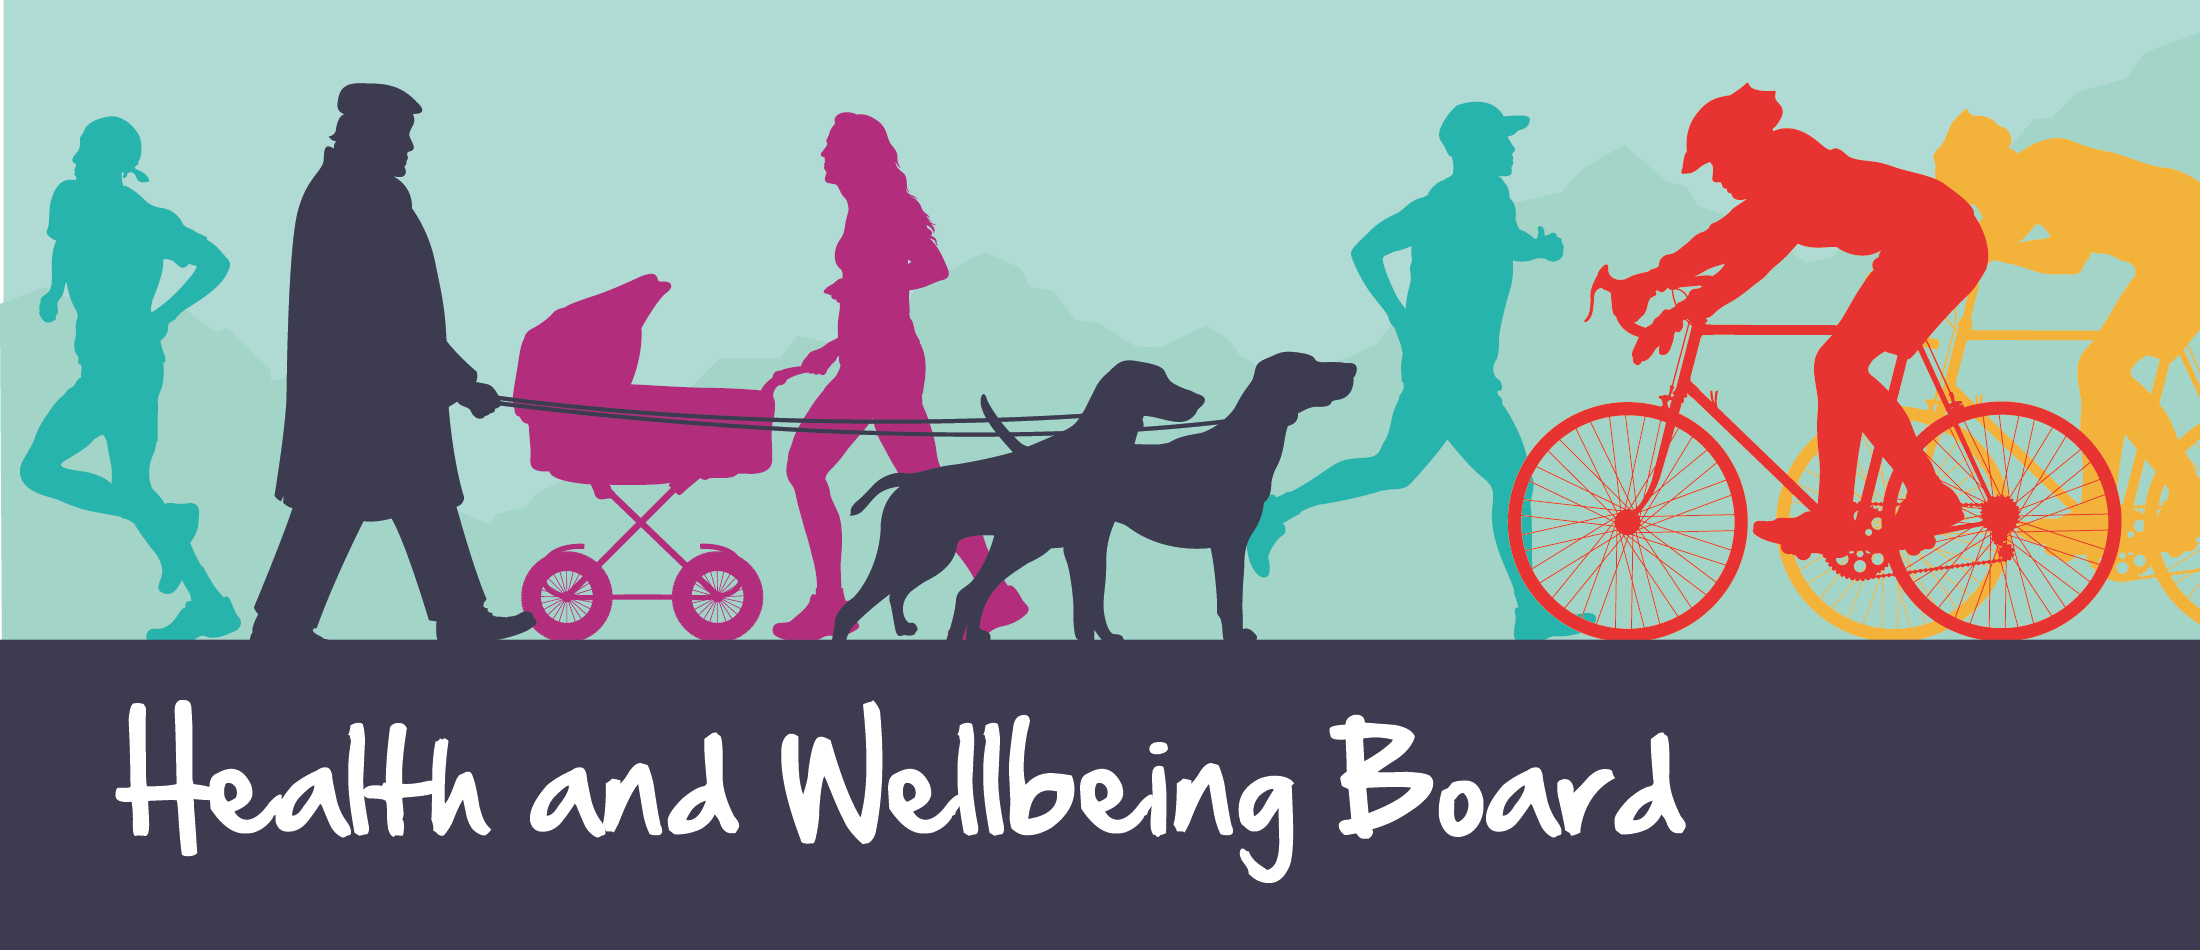 The Health and Wellbeing Board logo.